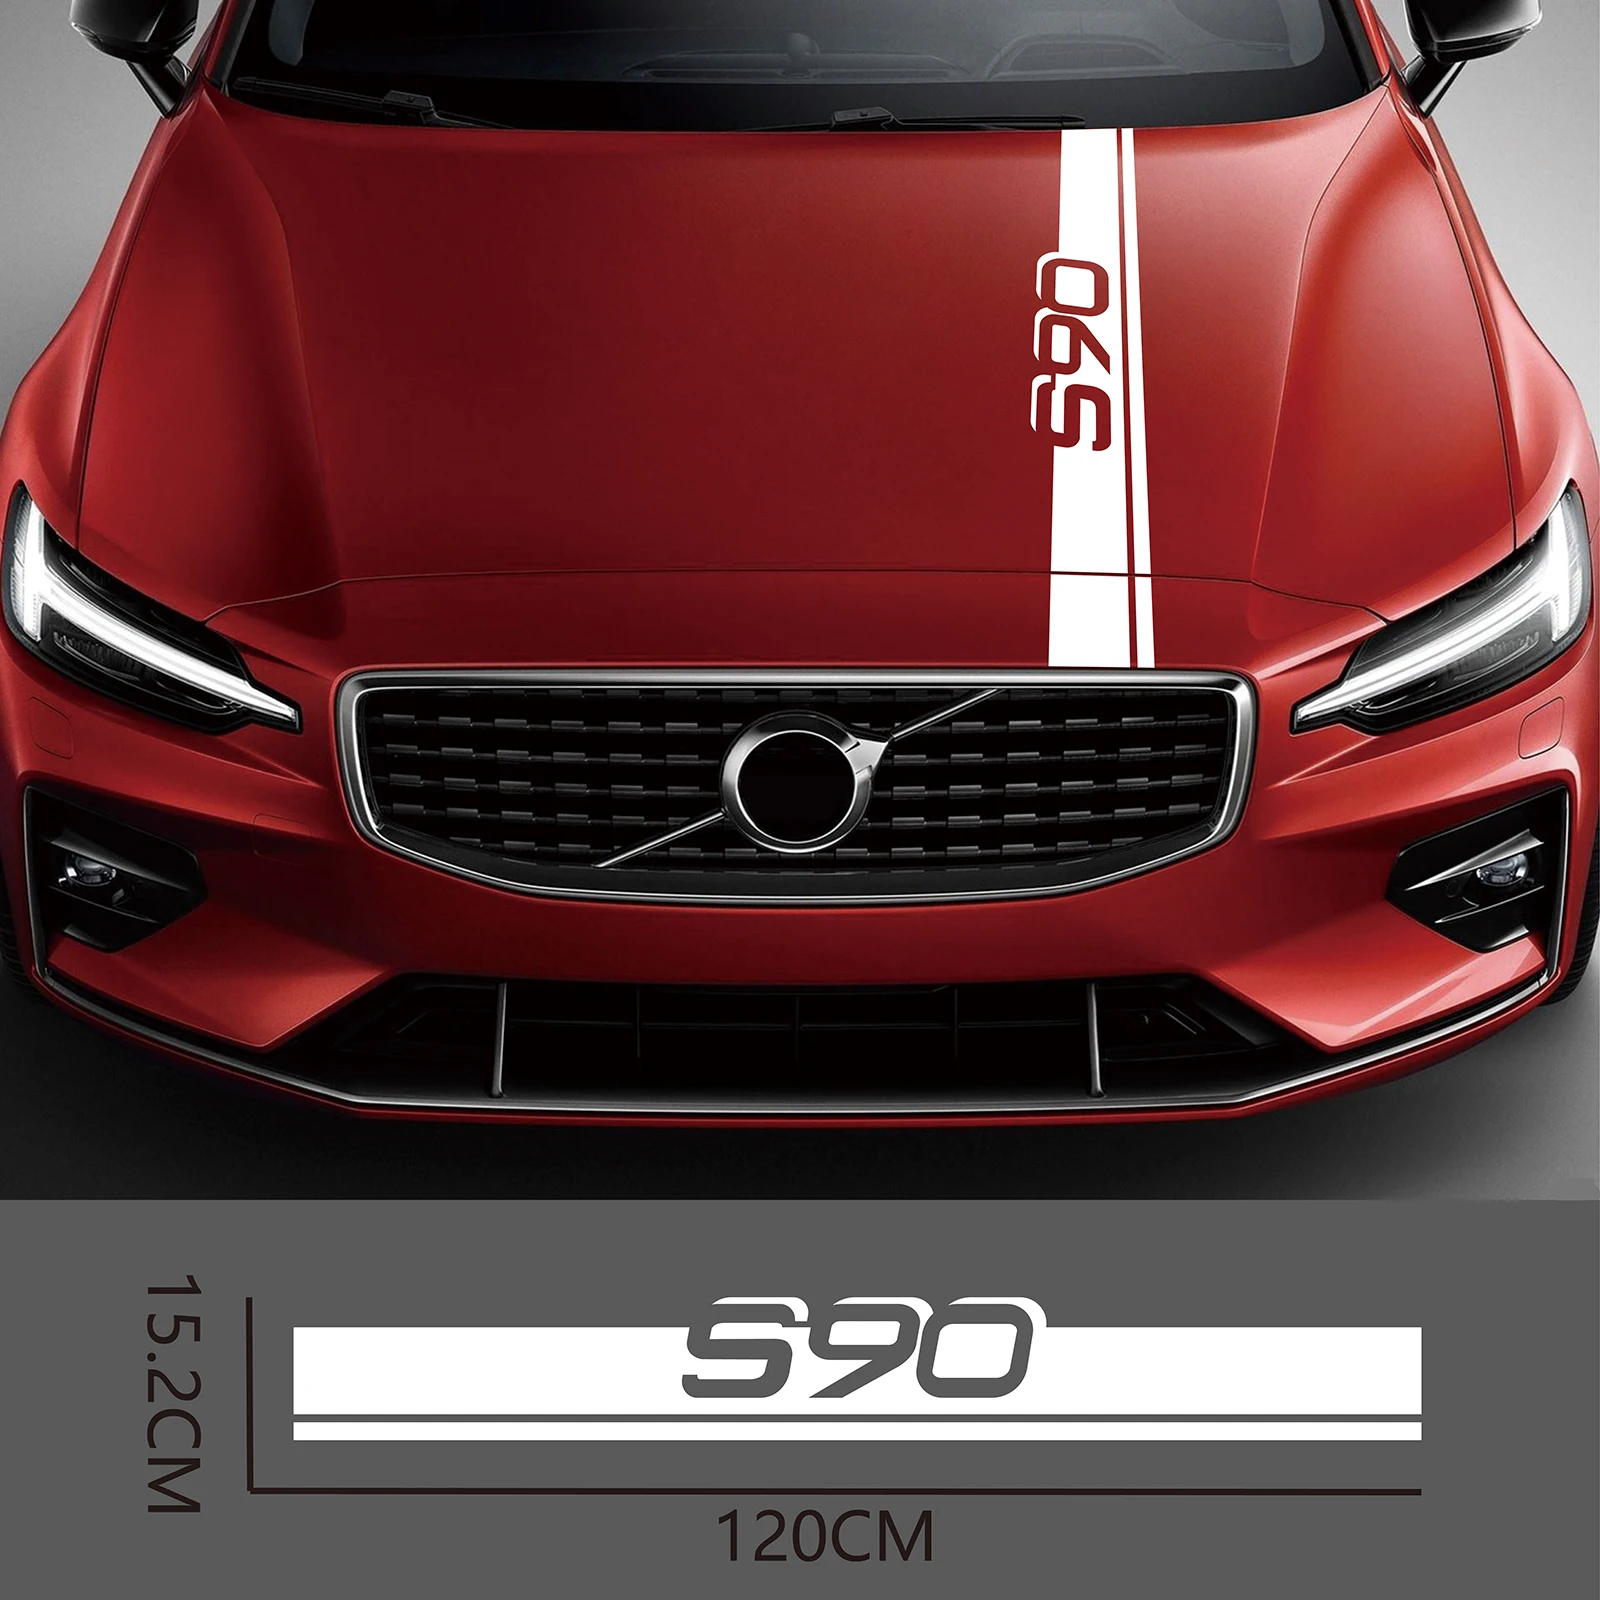 

Car Hood Engine Cover Sticker Decal Apply for Volvo XC60 XC90 XC40 S60 V40 S90 AWD C30 C70 S40 S80 T6 V50 V60 V70 V90 XC70